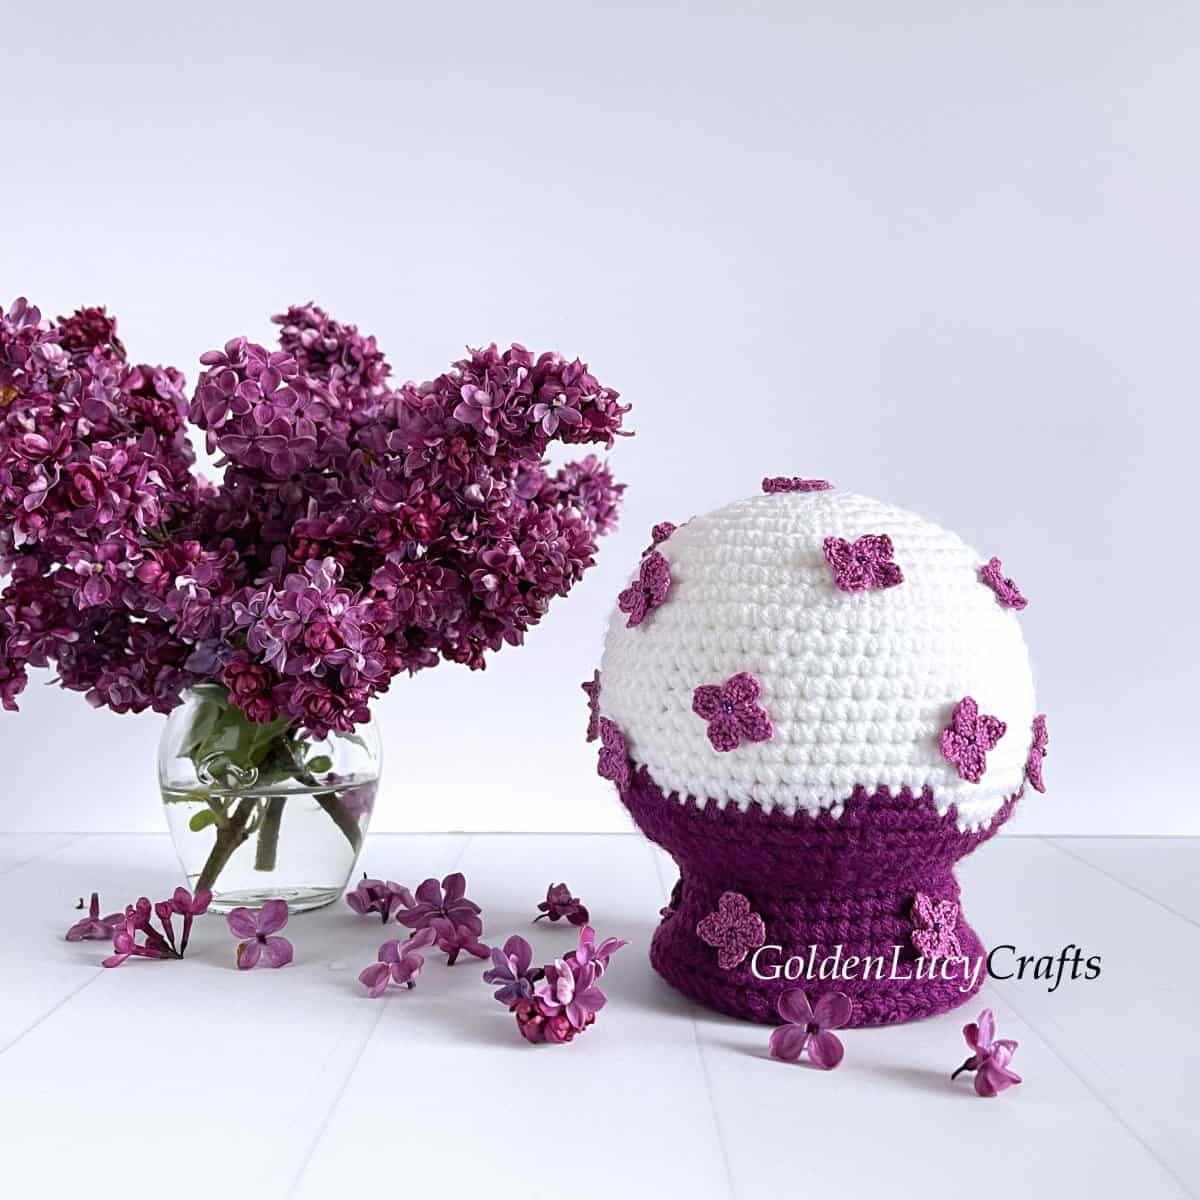 Crochet lilac snow globe, lilac flowers in vase.